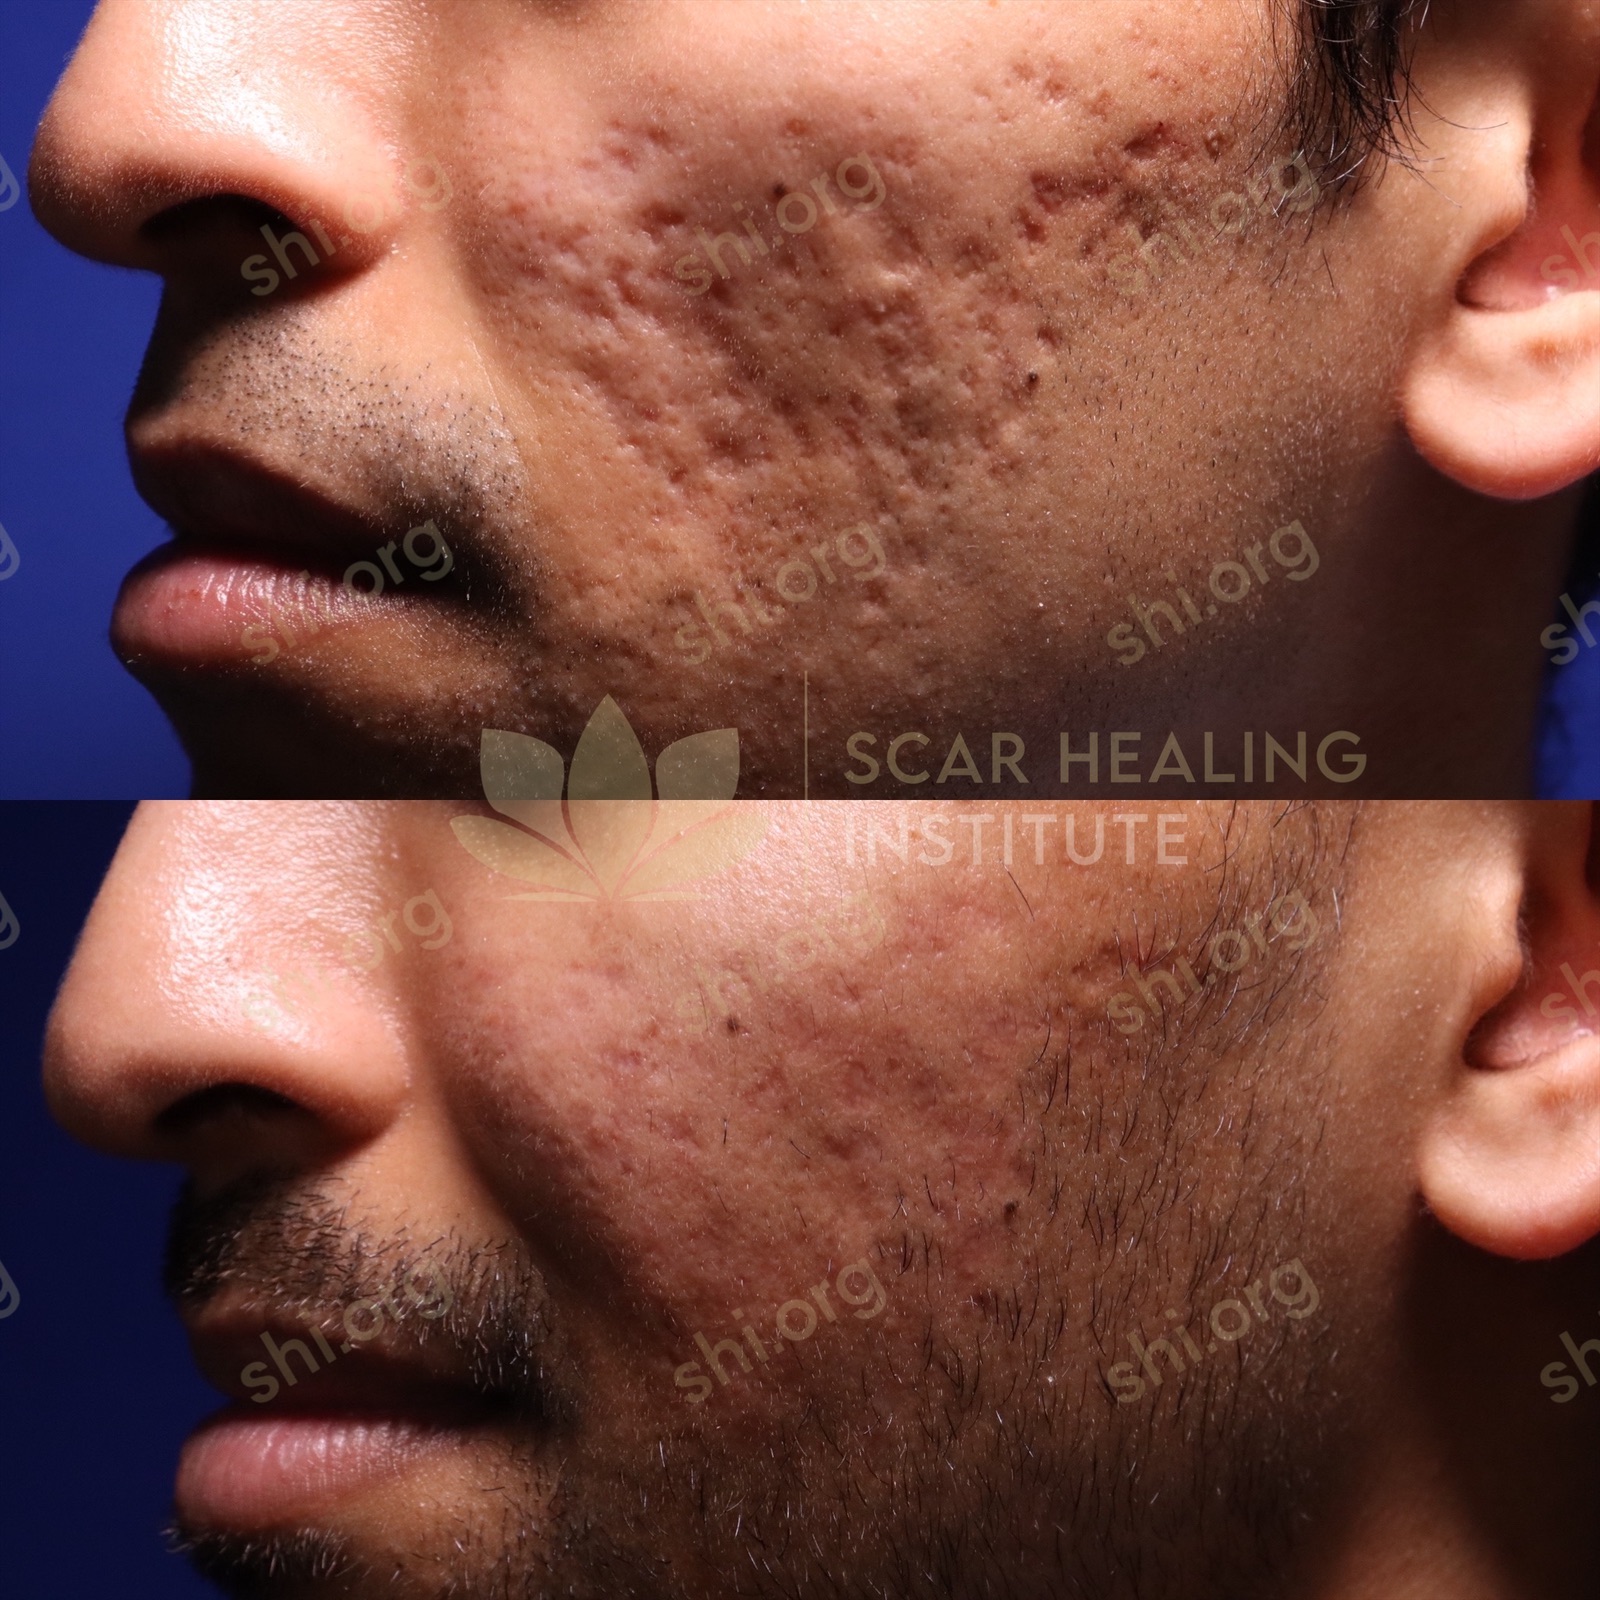 PN SHI 39 - Acne Scarring Active Acne Patient Results Scar Healing